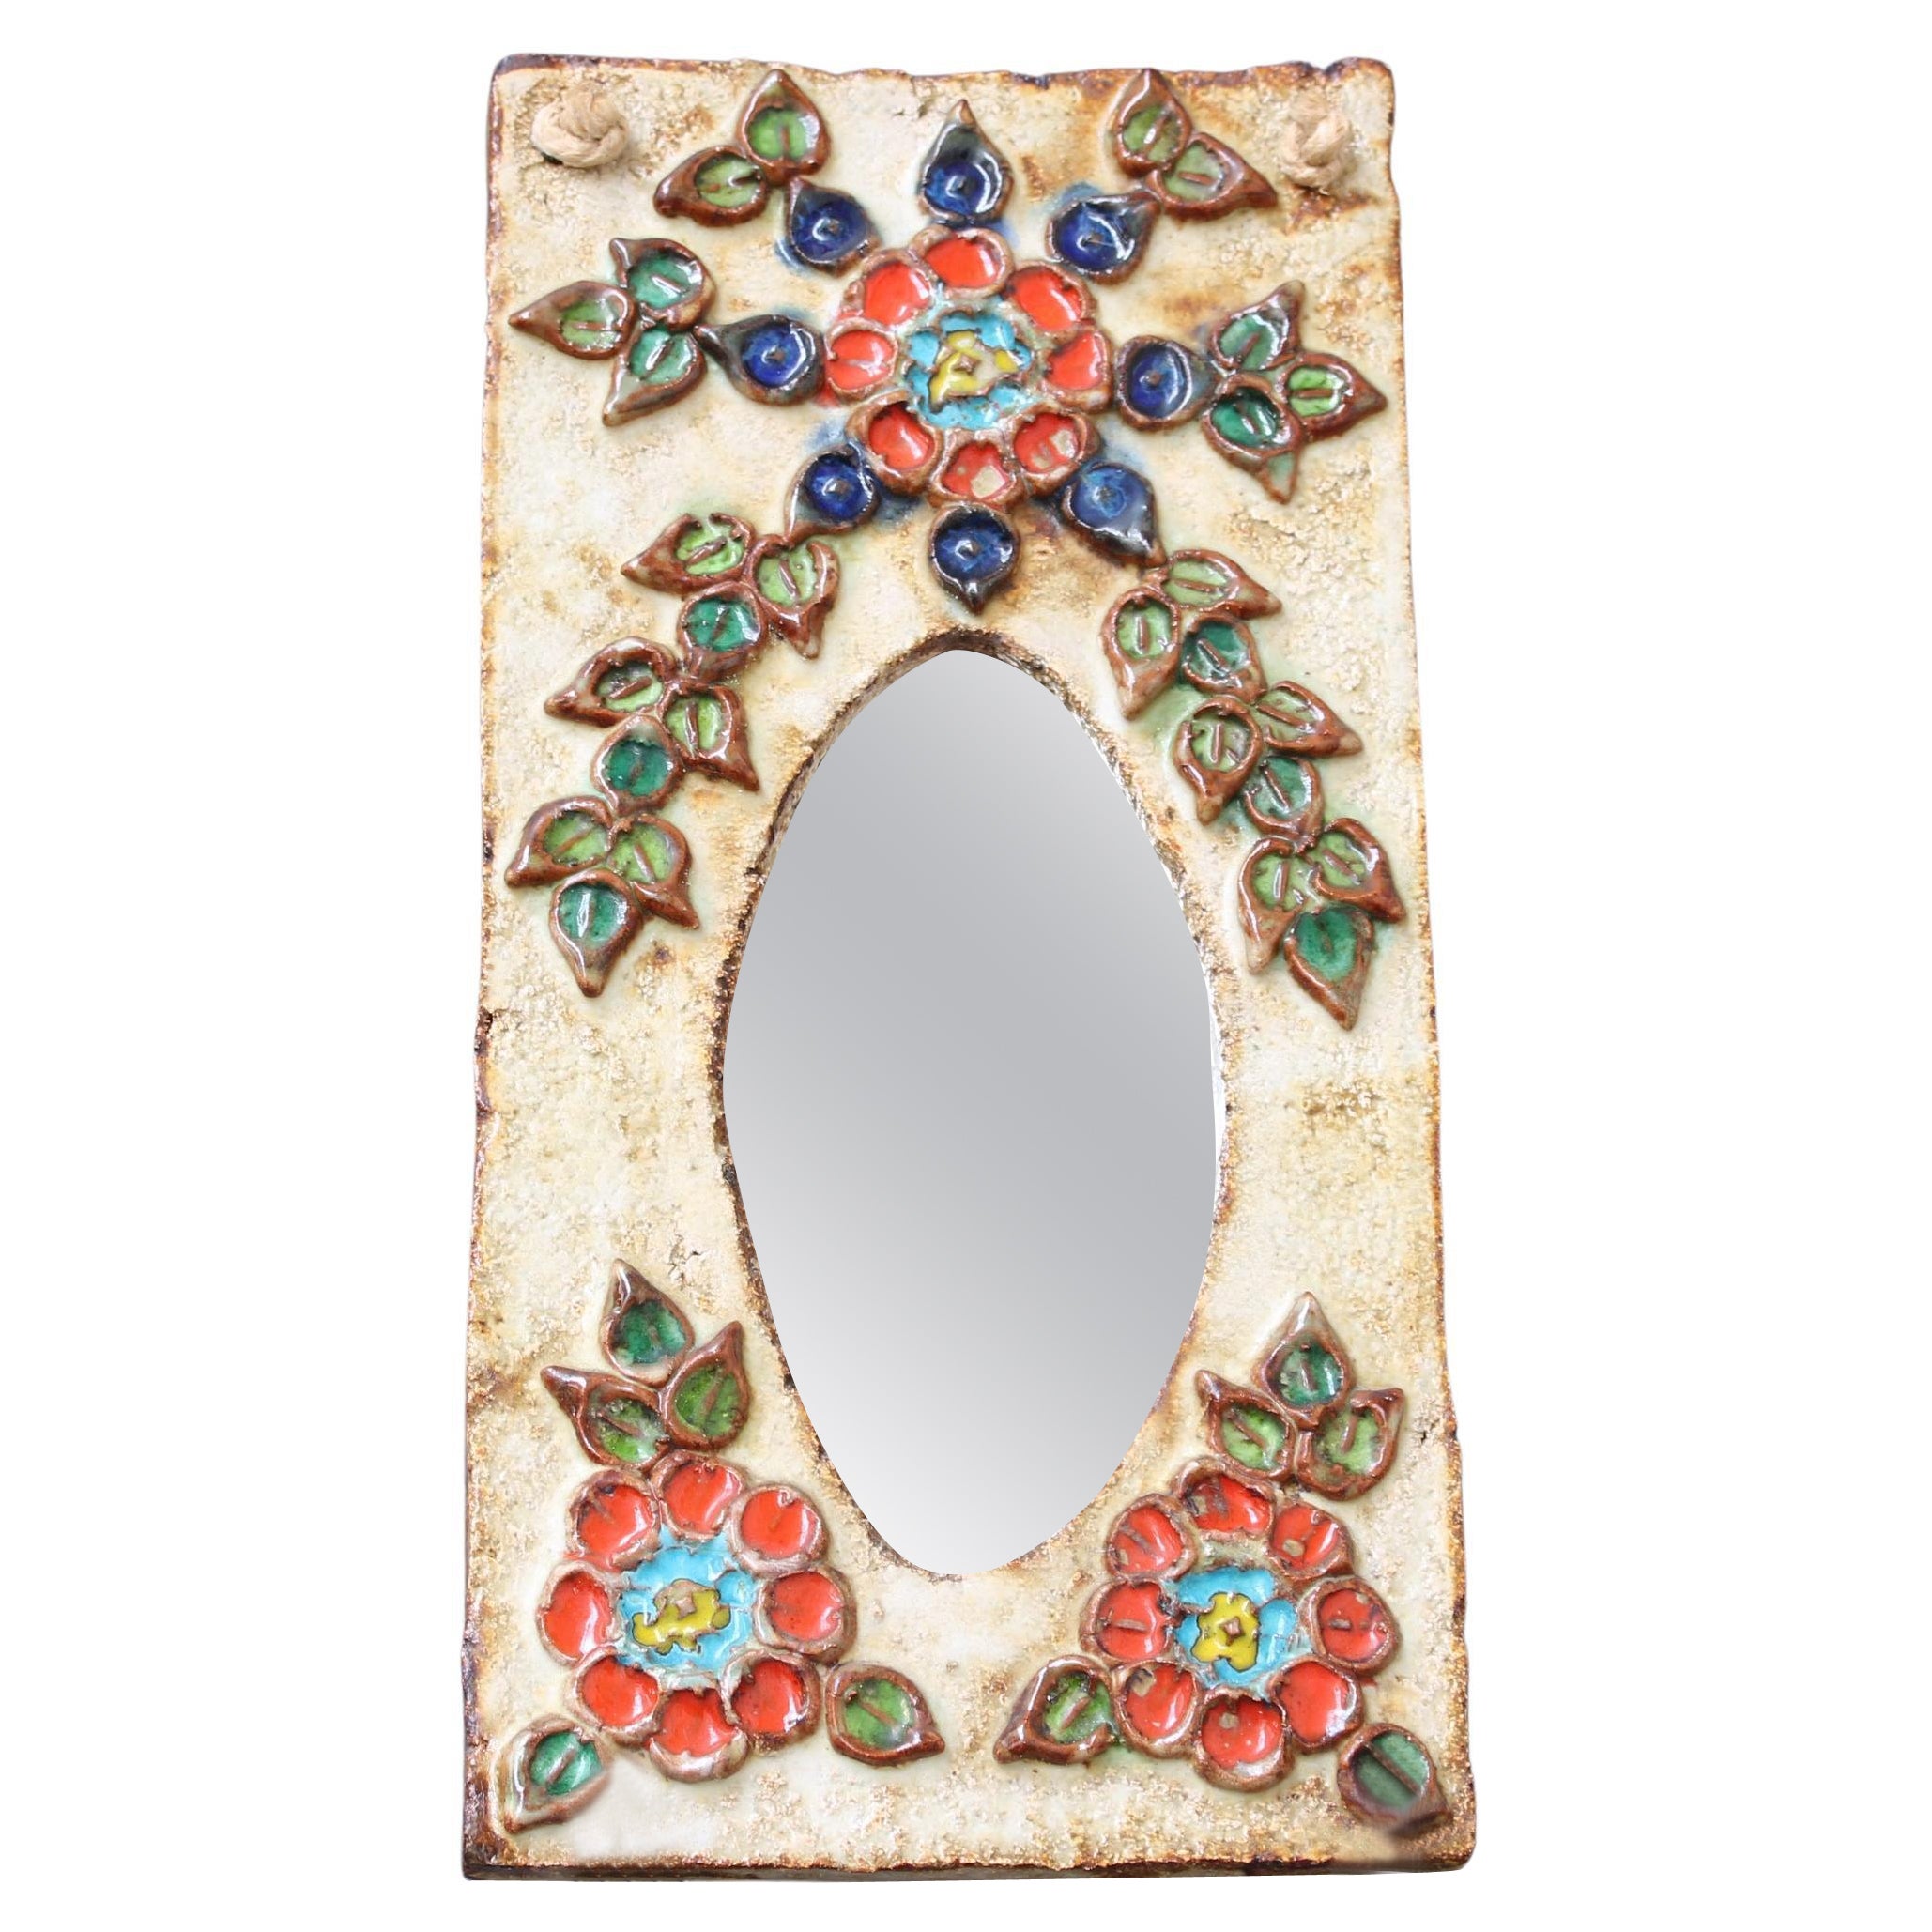 Vintage French Ceramic Wall Mirror with Flower Motif by La Roue, 'circa 1960s'